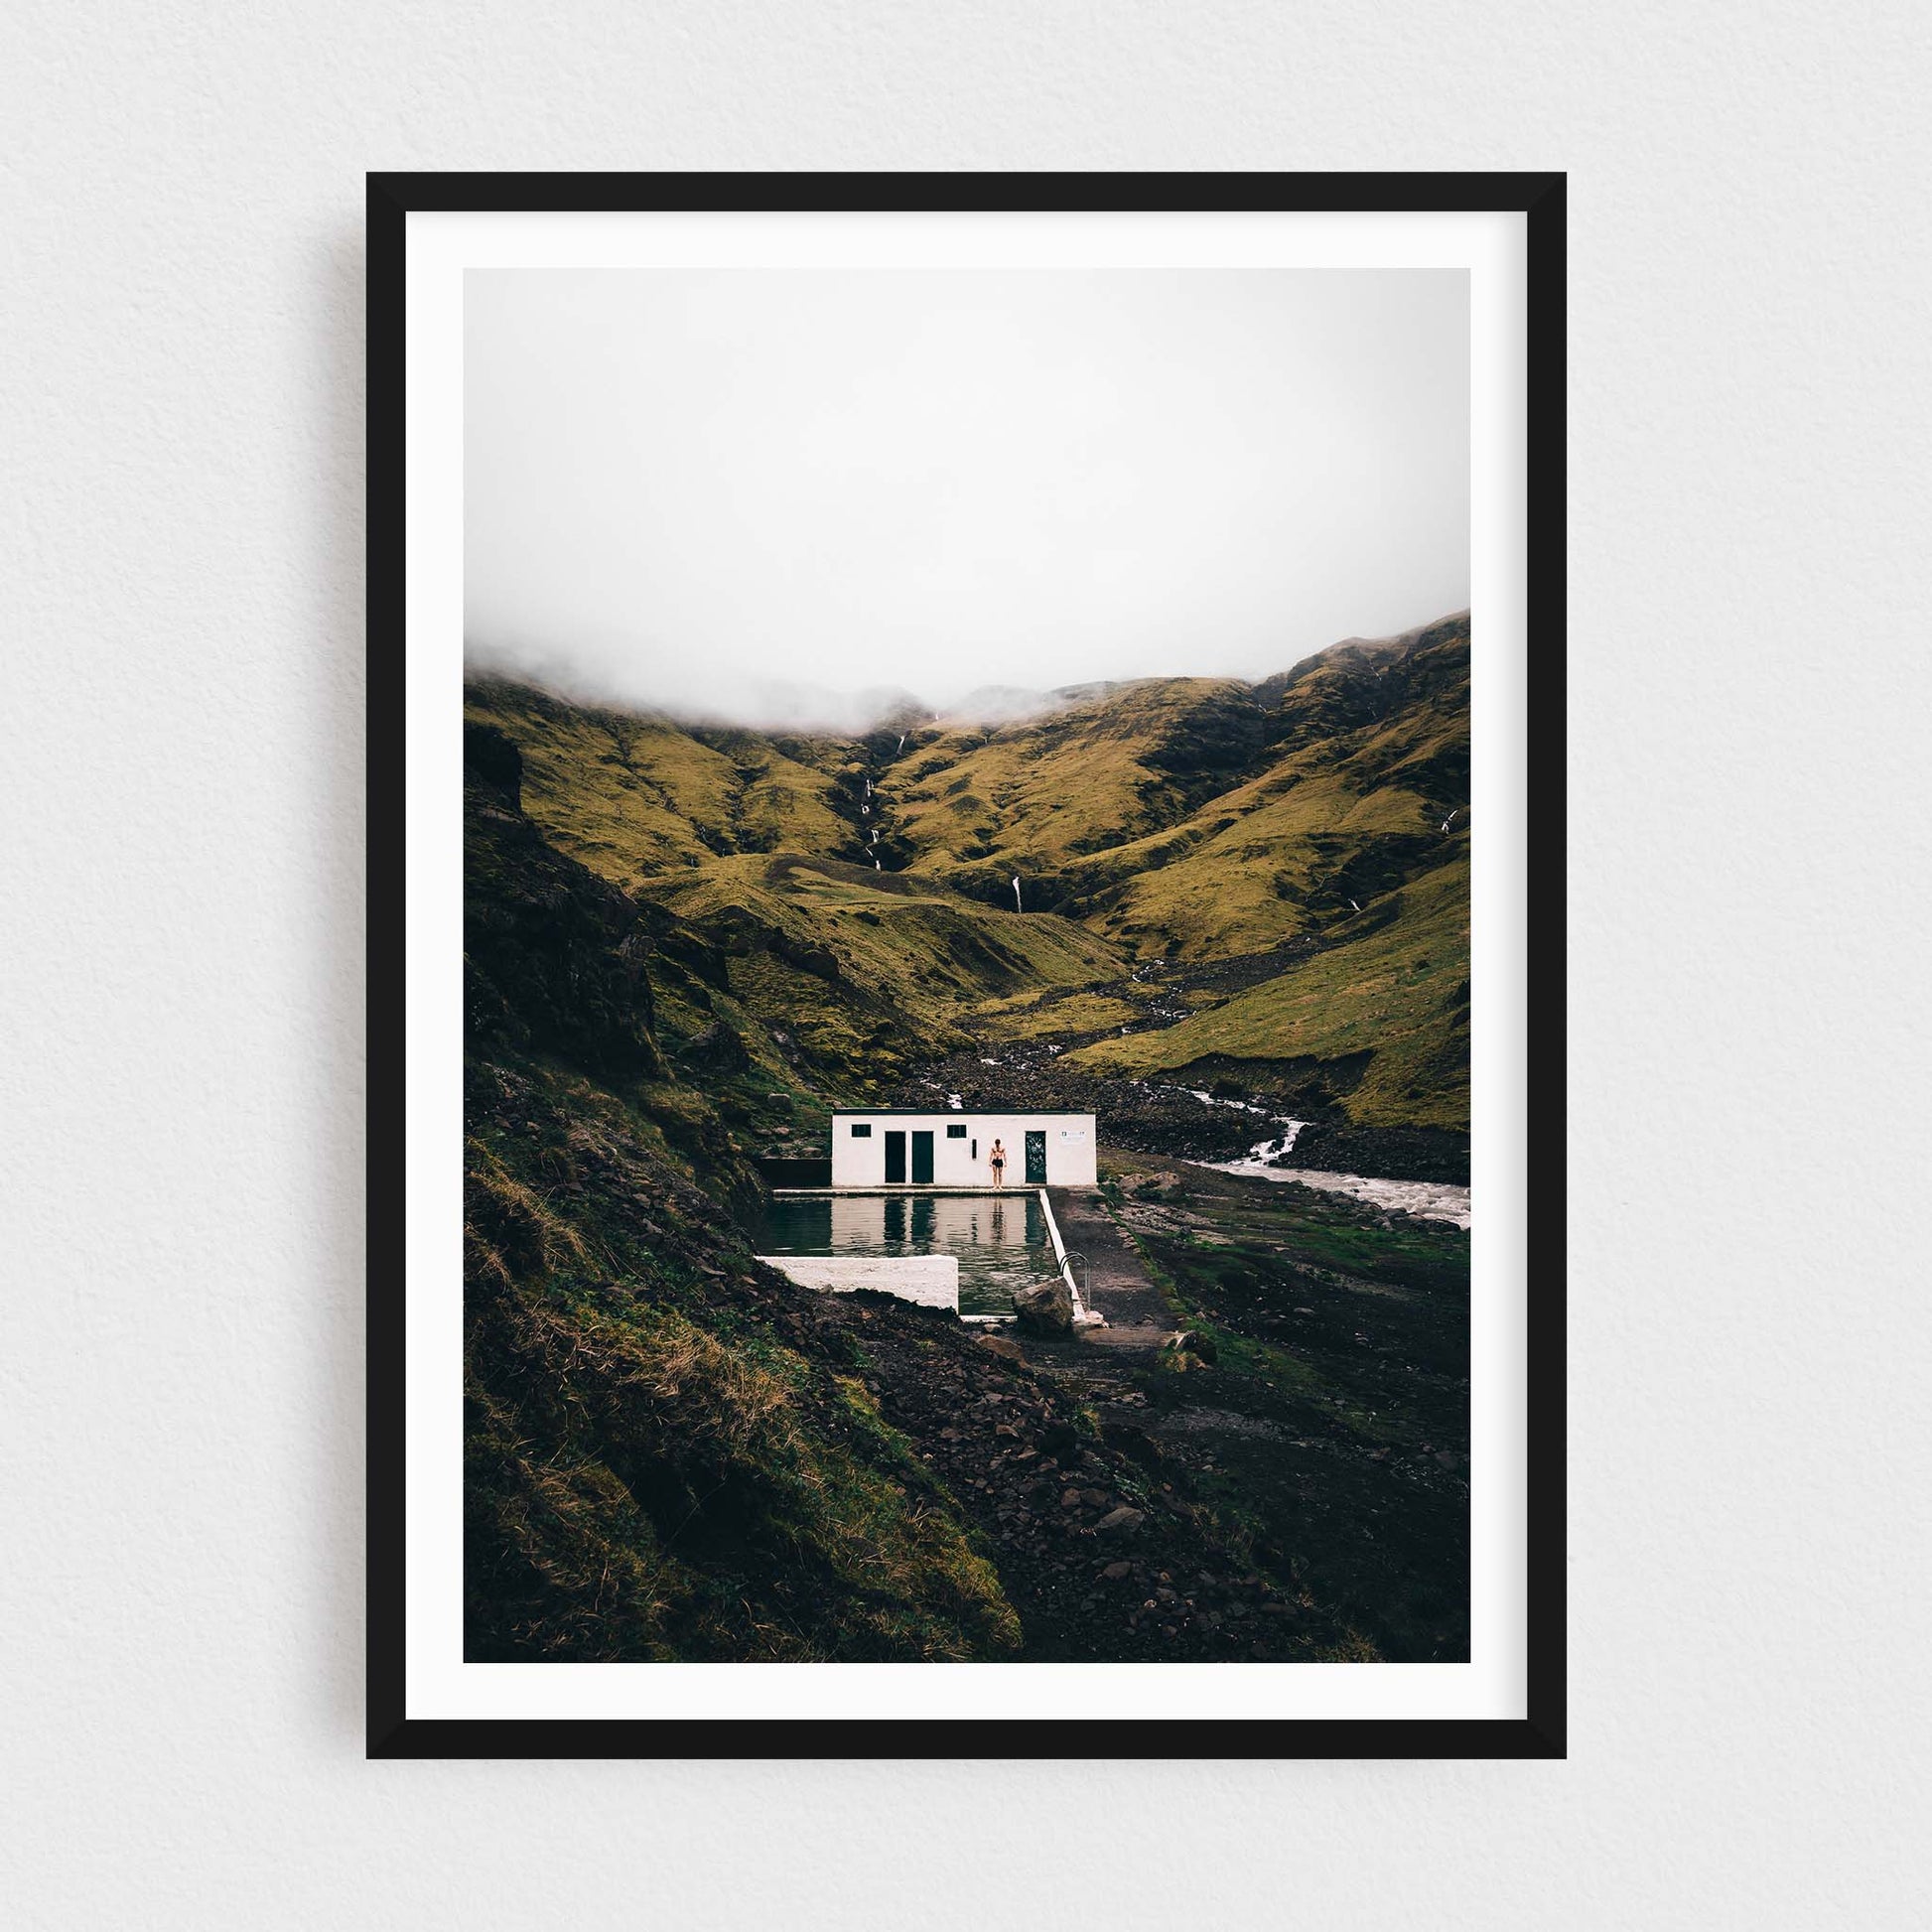 Iceland fine art photography print featuring Seljavallalaug pool, in a black frame